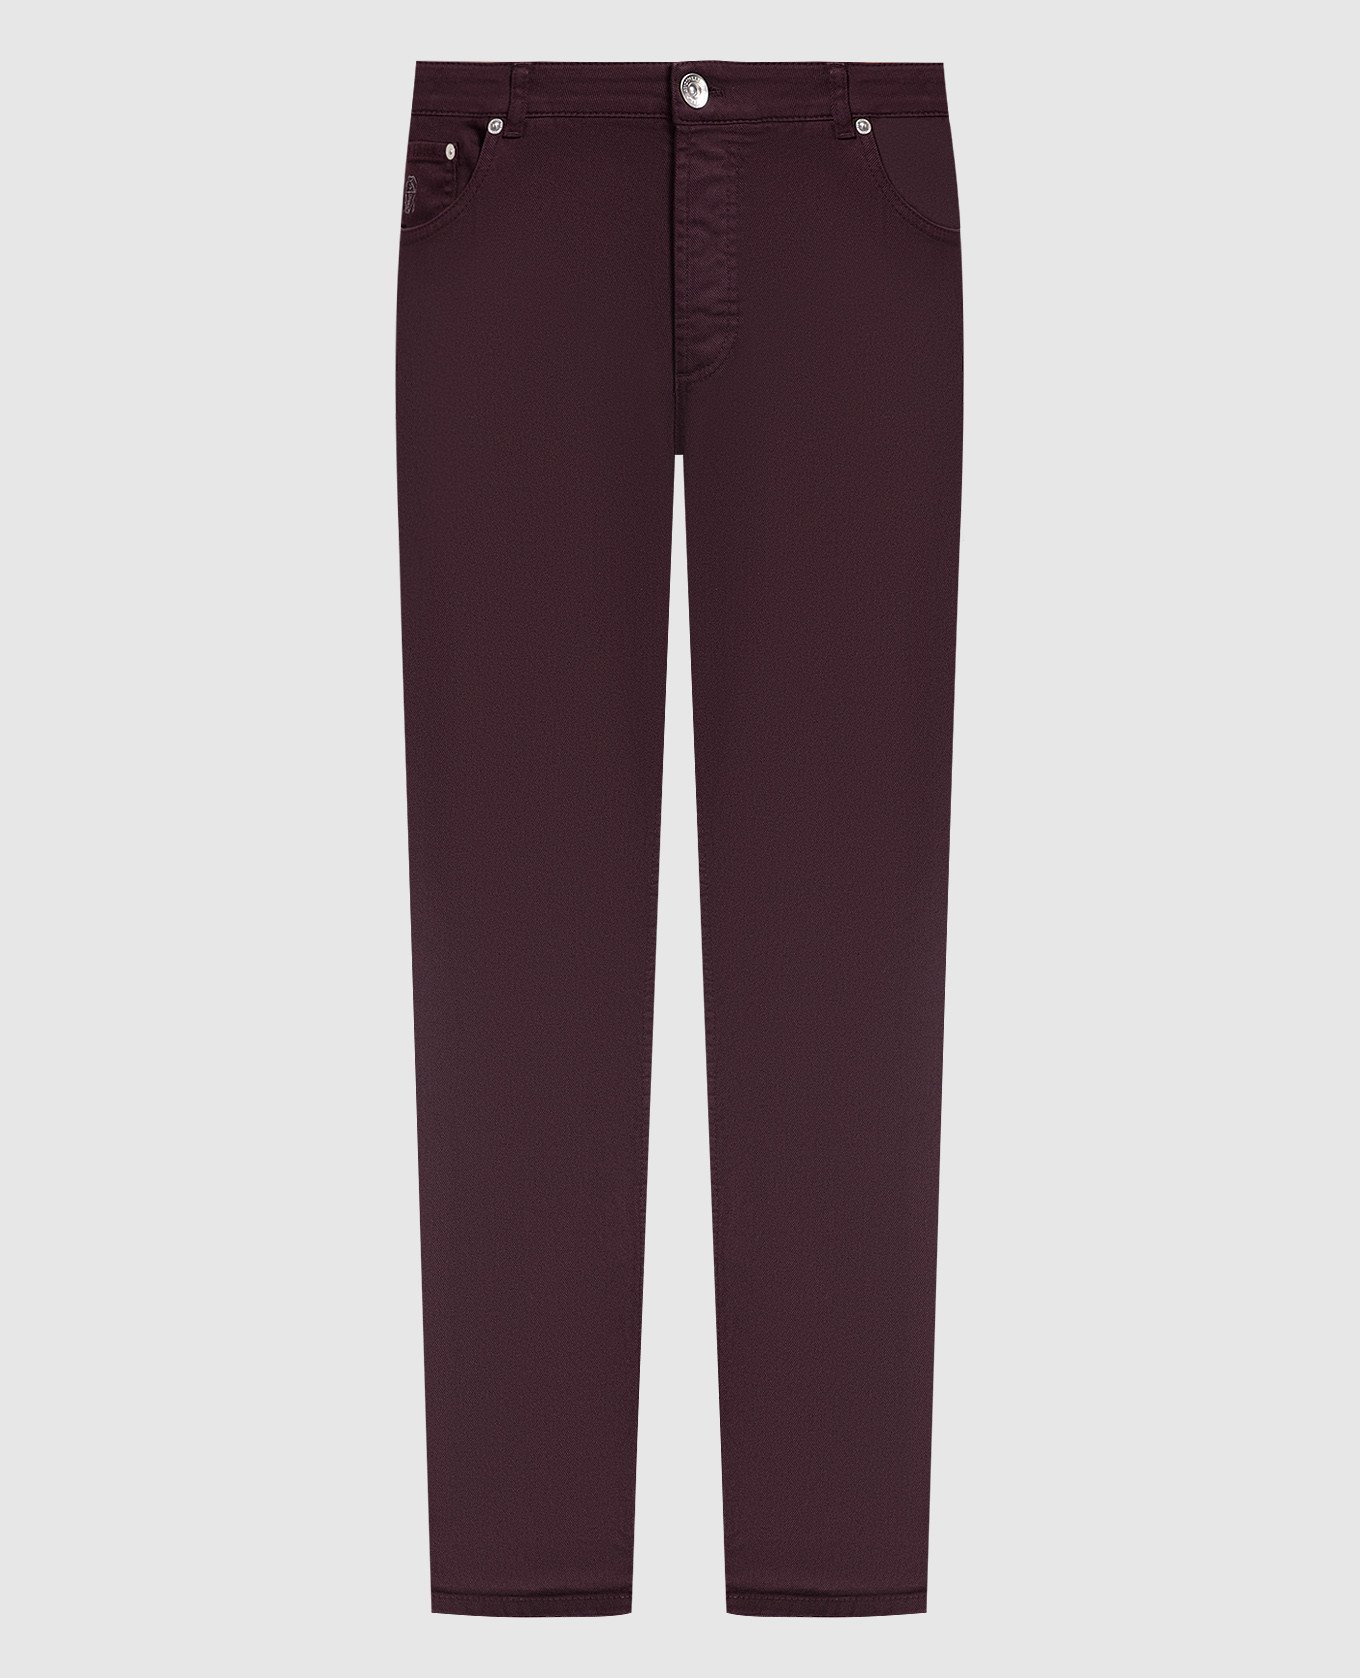 Burgundy jeans with logo